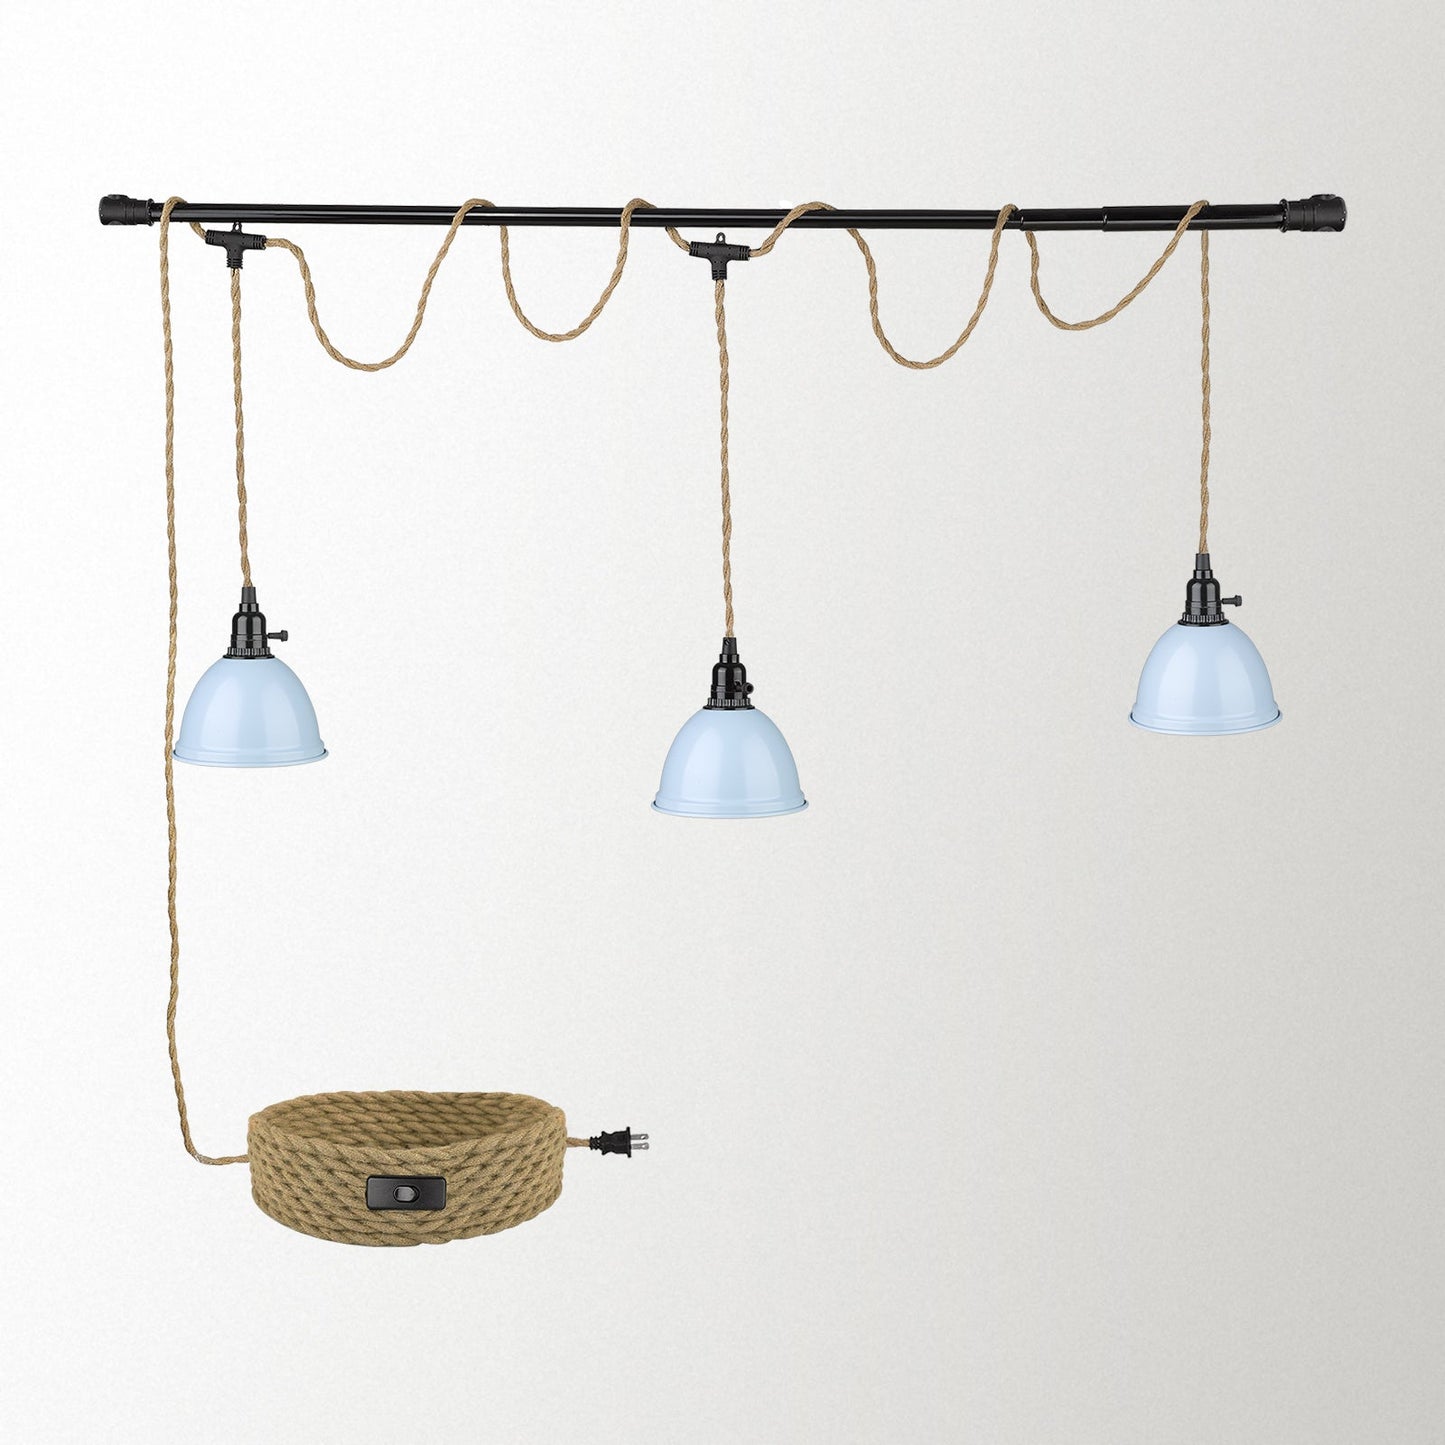 
                  
                    Emliviar Triple Pendant Light with Plug in Cord - 29FT Industrial Hanging Lamp with Twisted Hemp Rope Independent Switch, Black Finish, YCE240-3 BK
                  
                